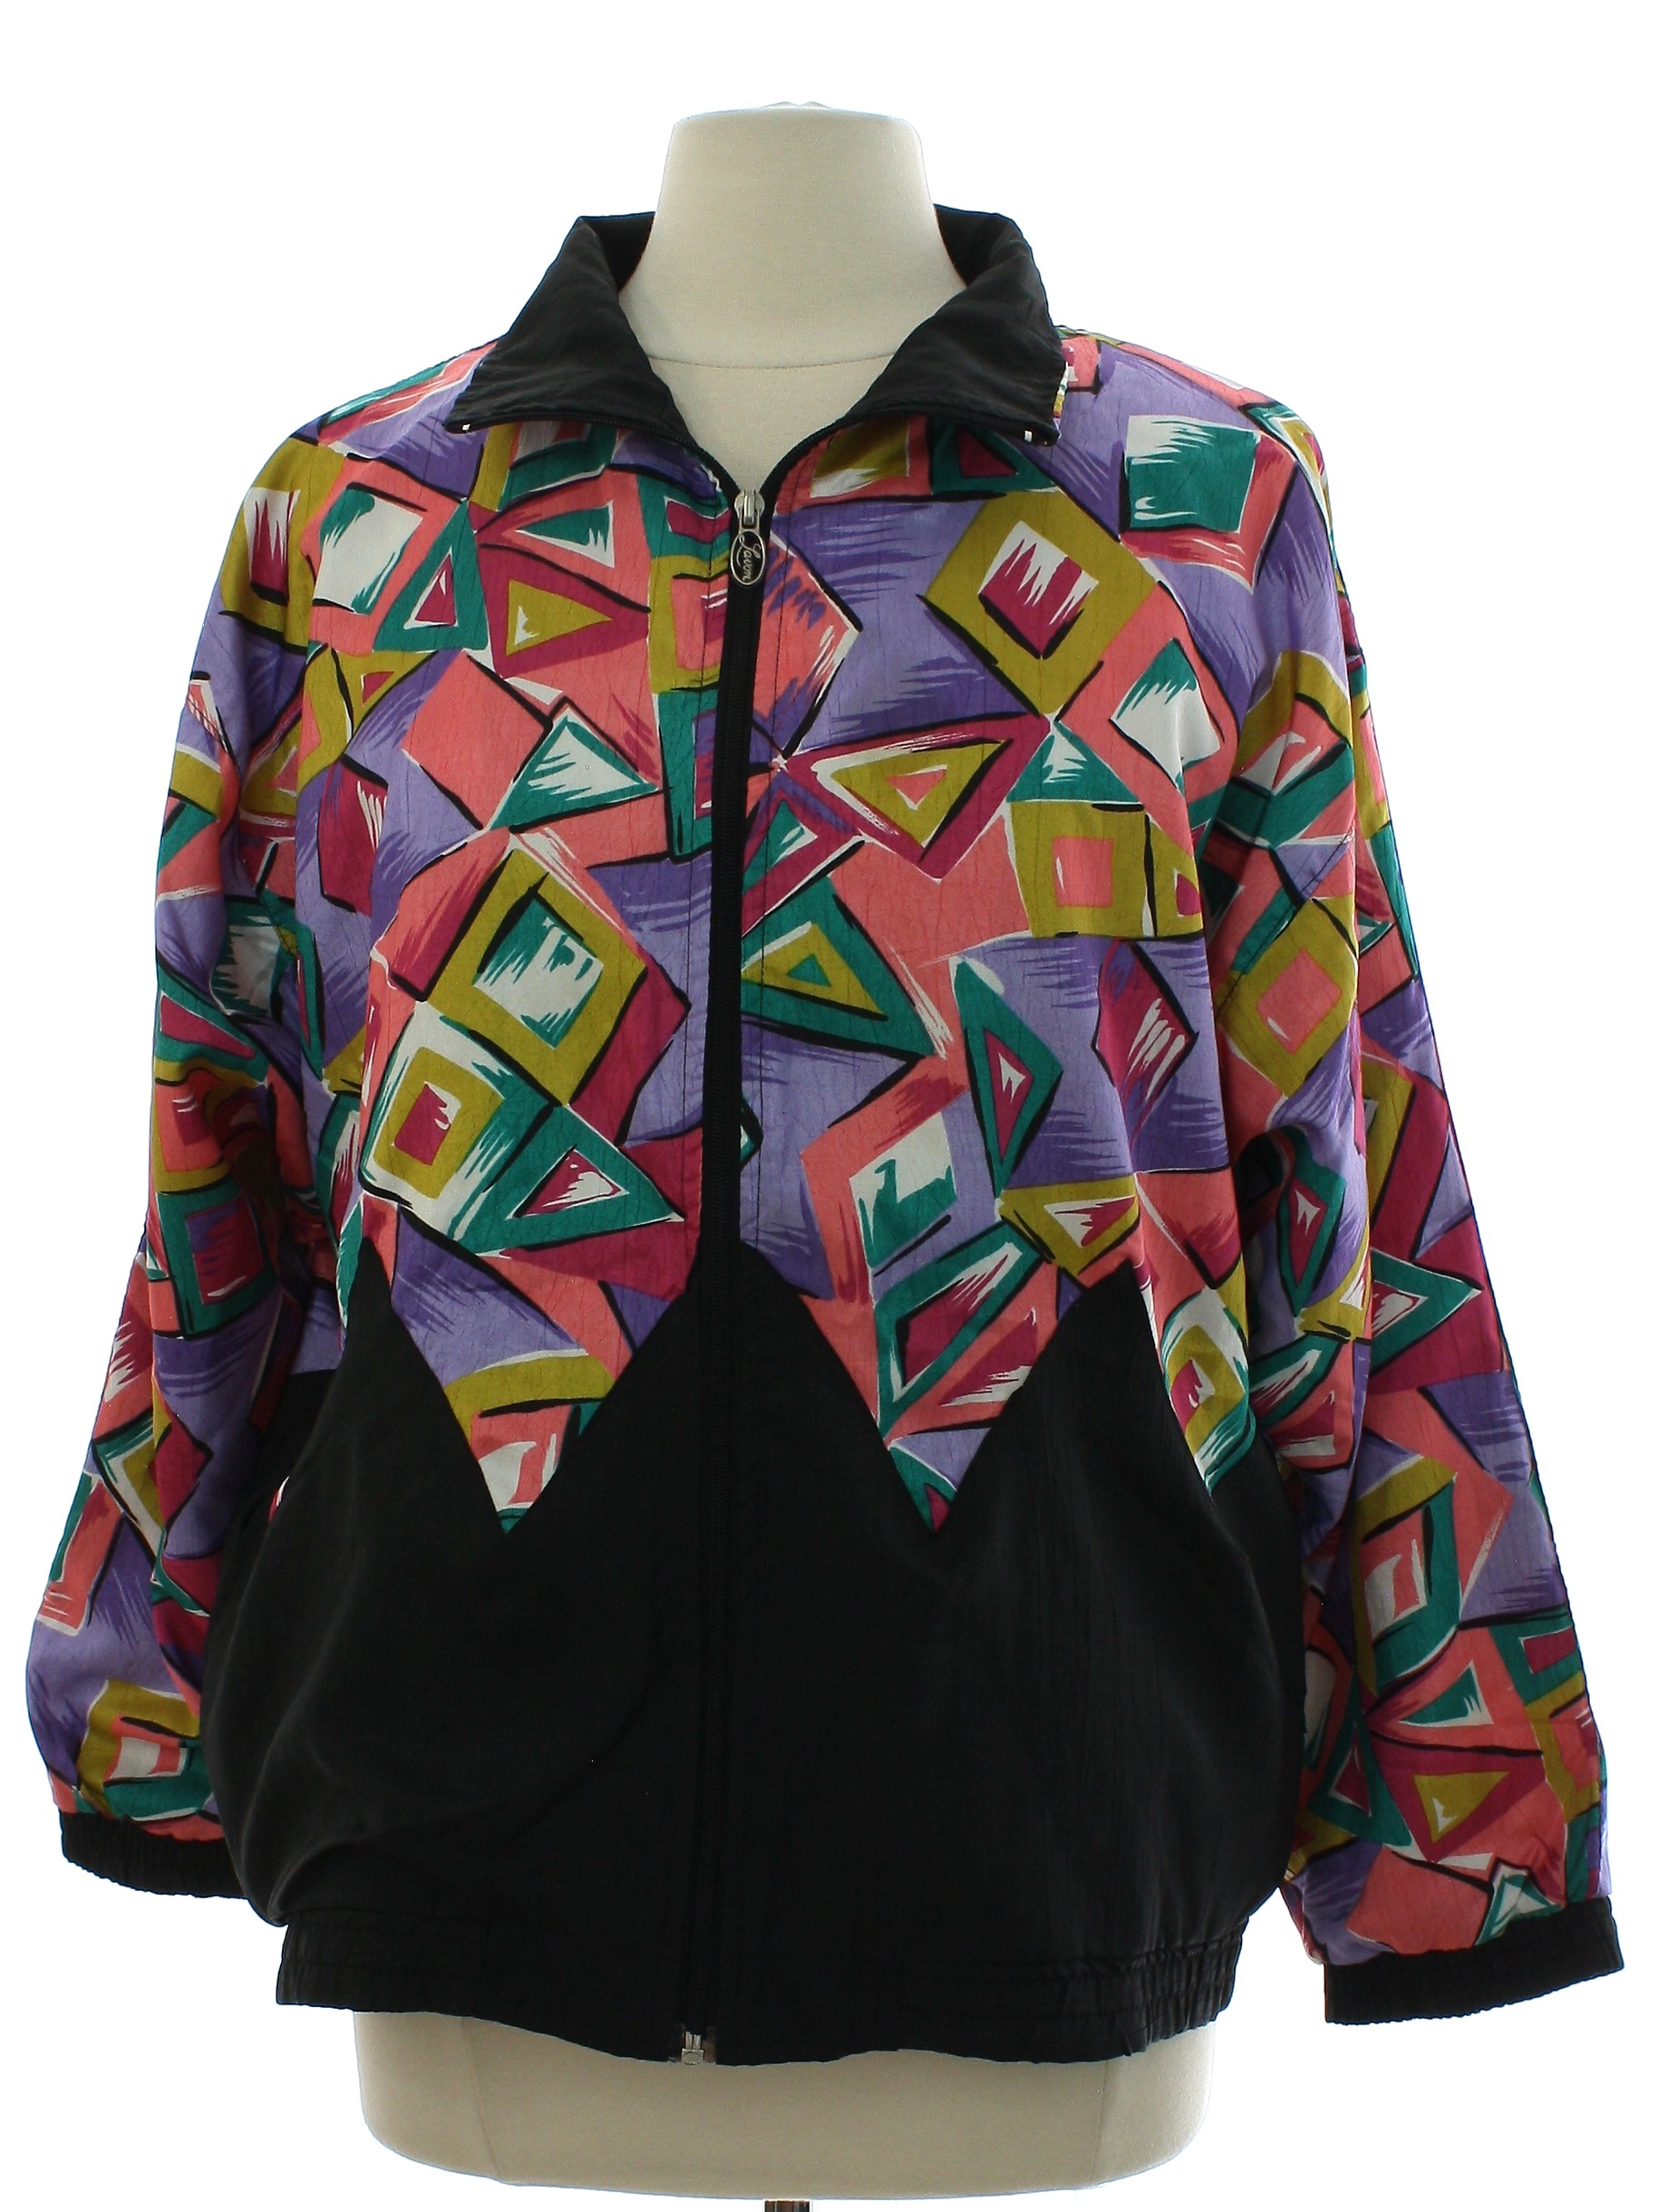 privacy Bandit arm 80s windbreaker jackets Unthinkable Dominant The office